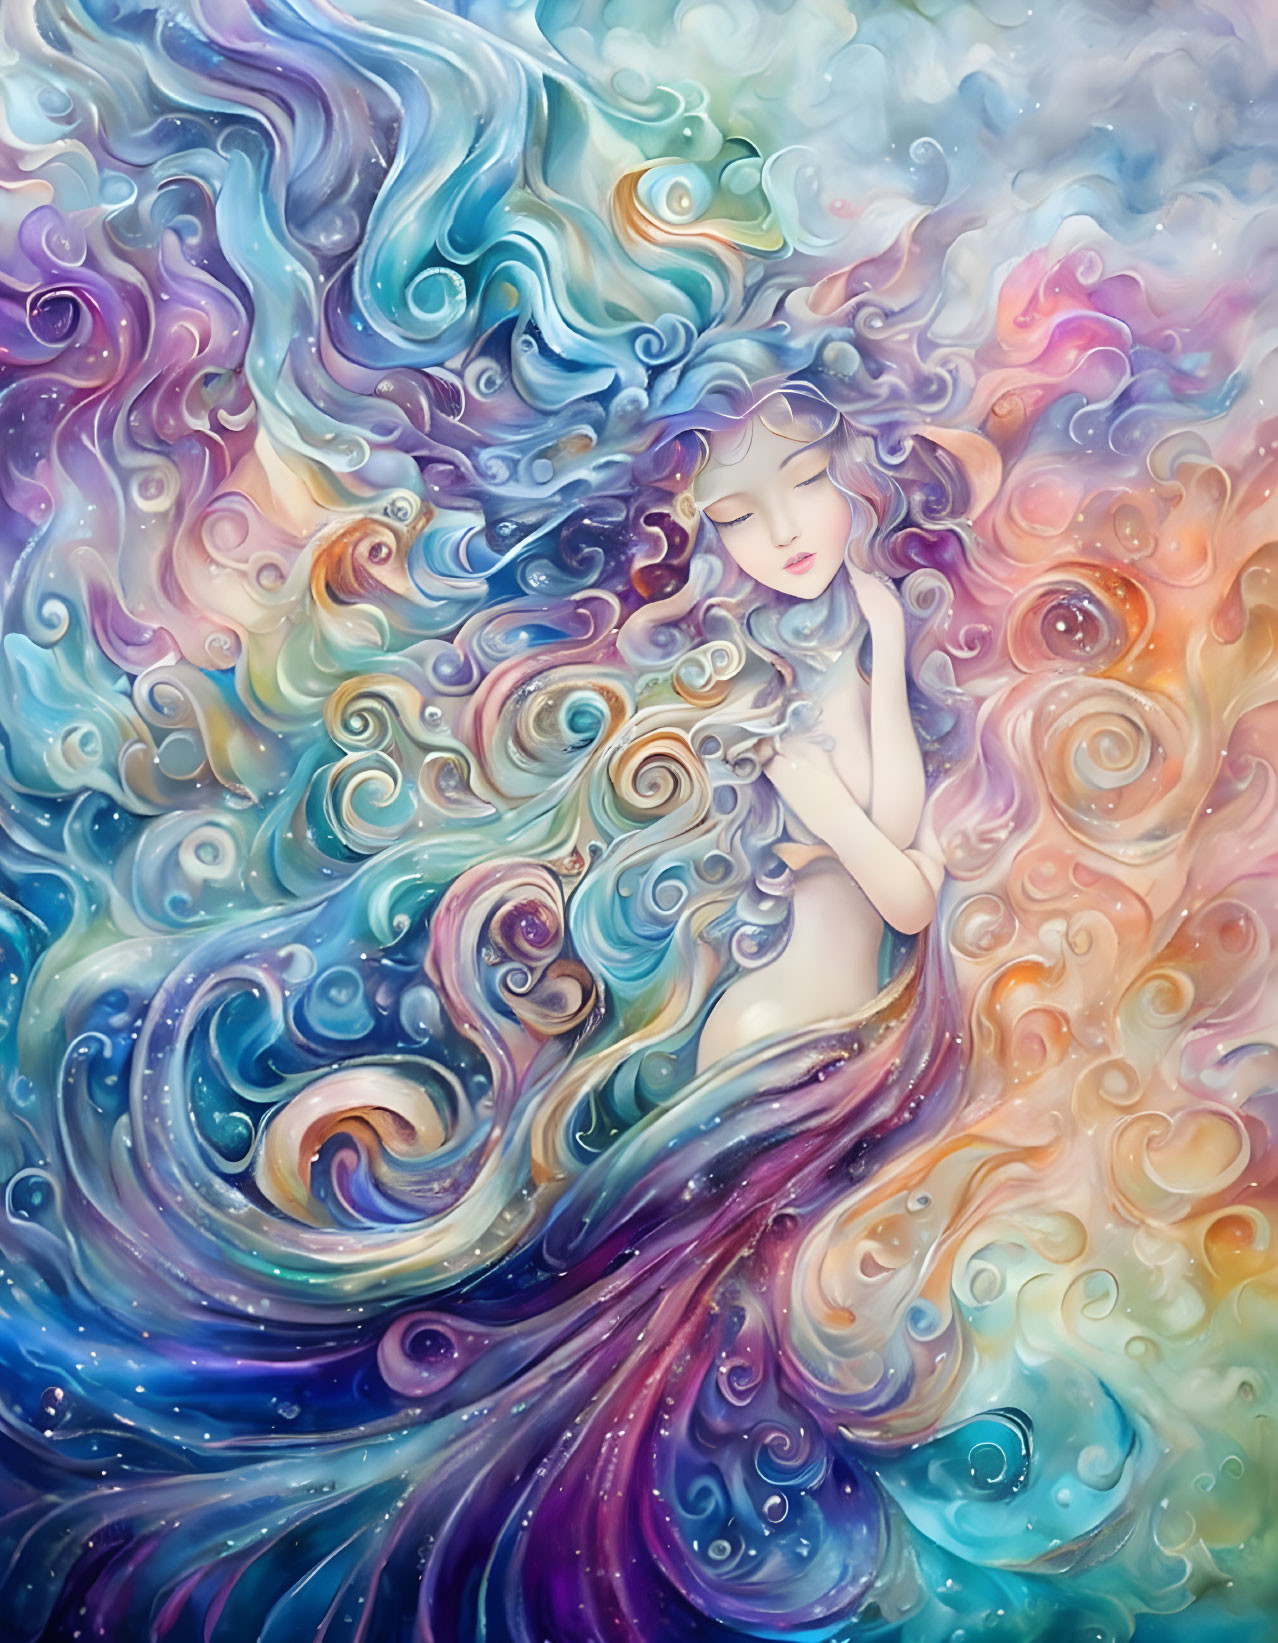 Ethereal painting of woman in vibrant blue and purple swirls